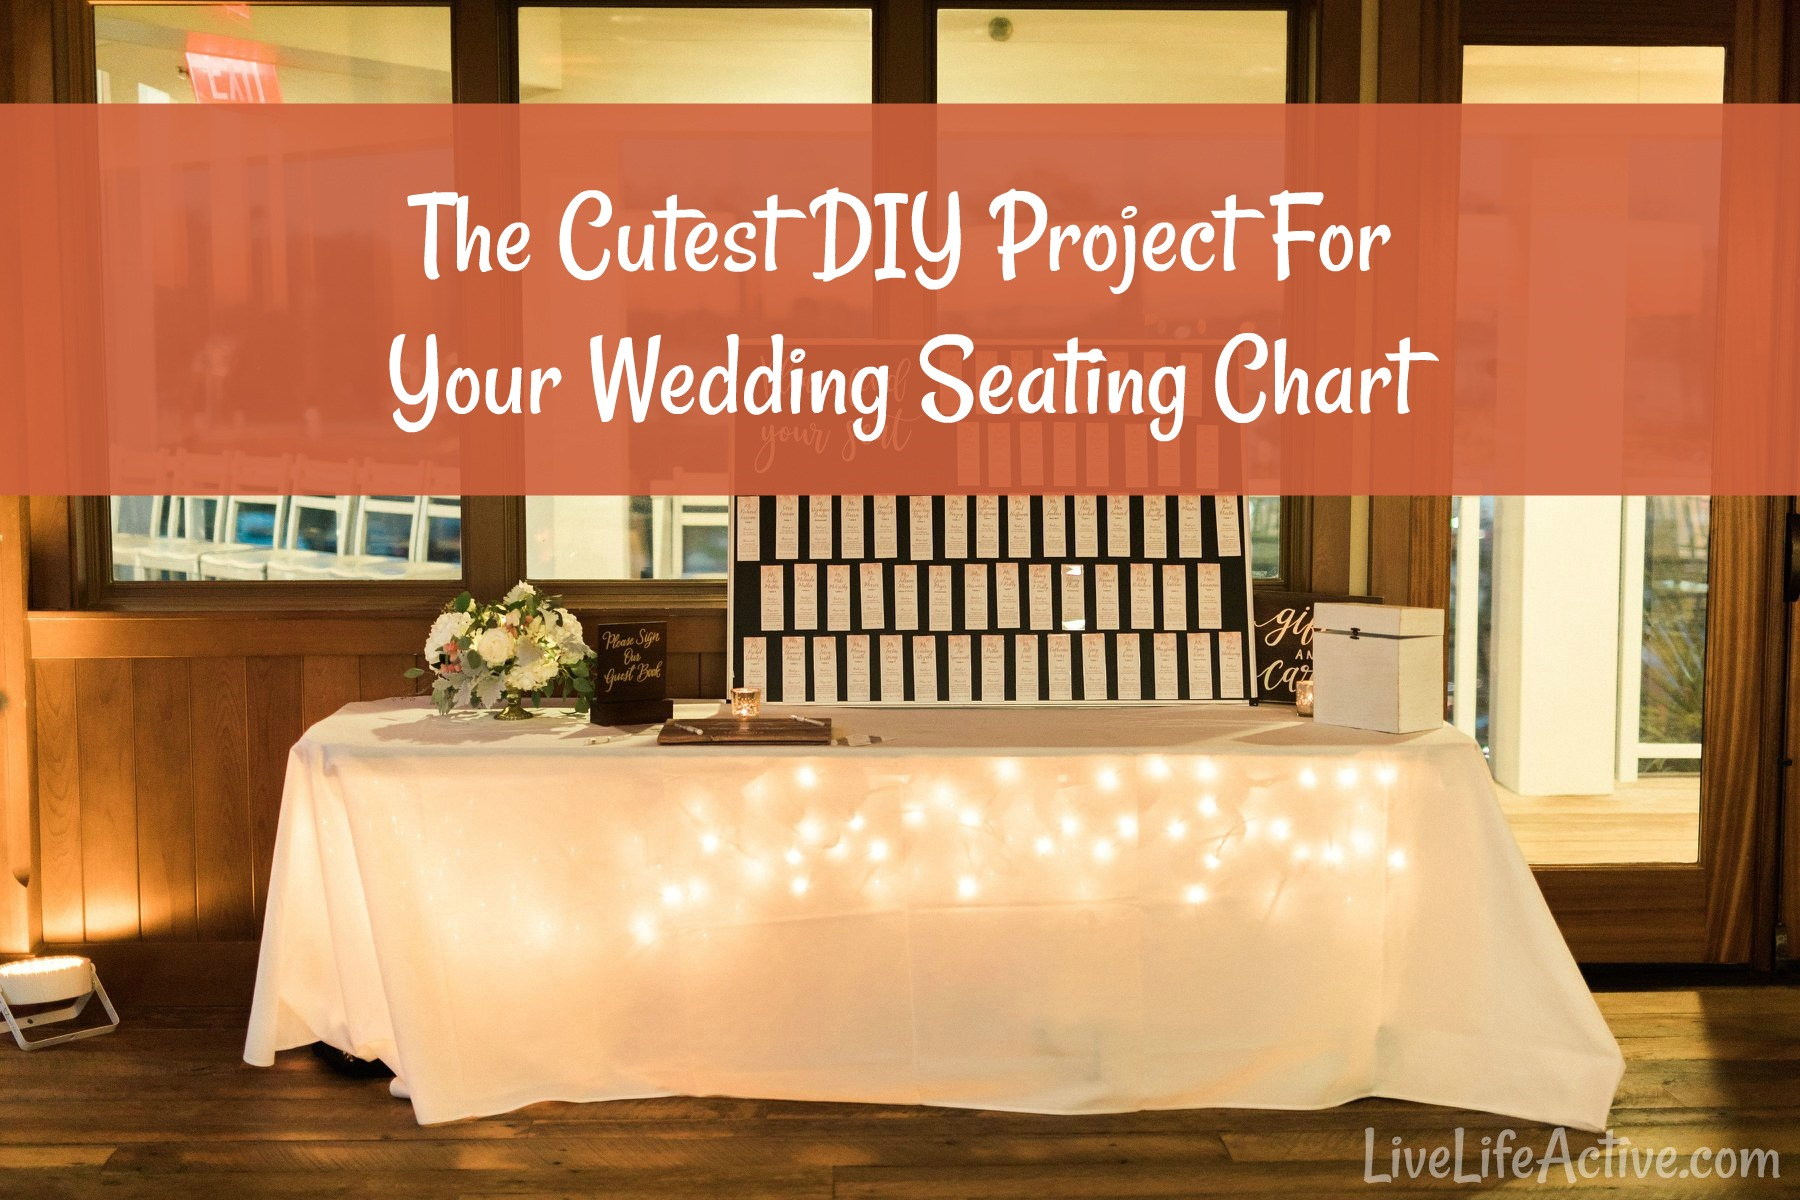 The cutest diy project for your wedding seating chart